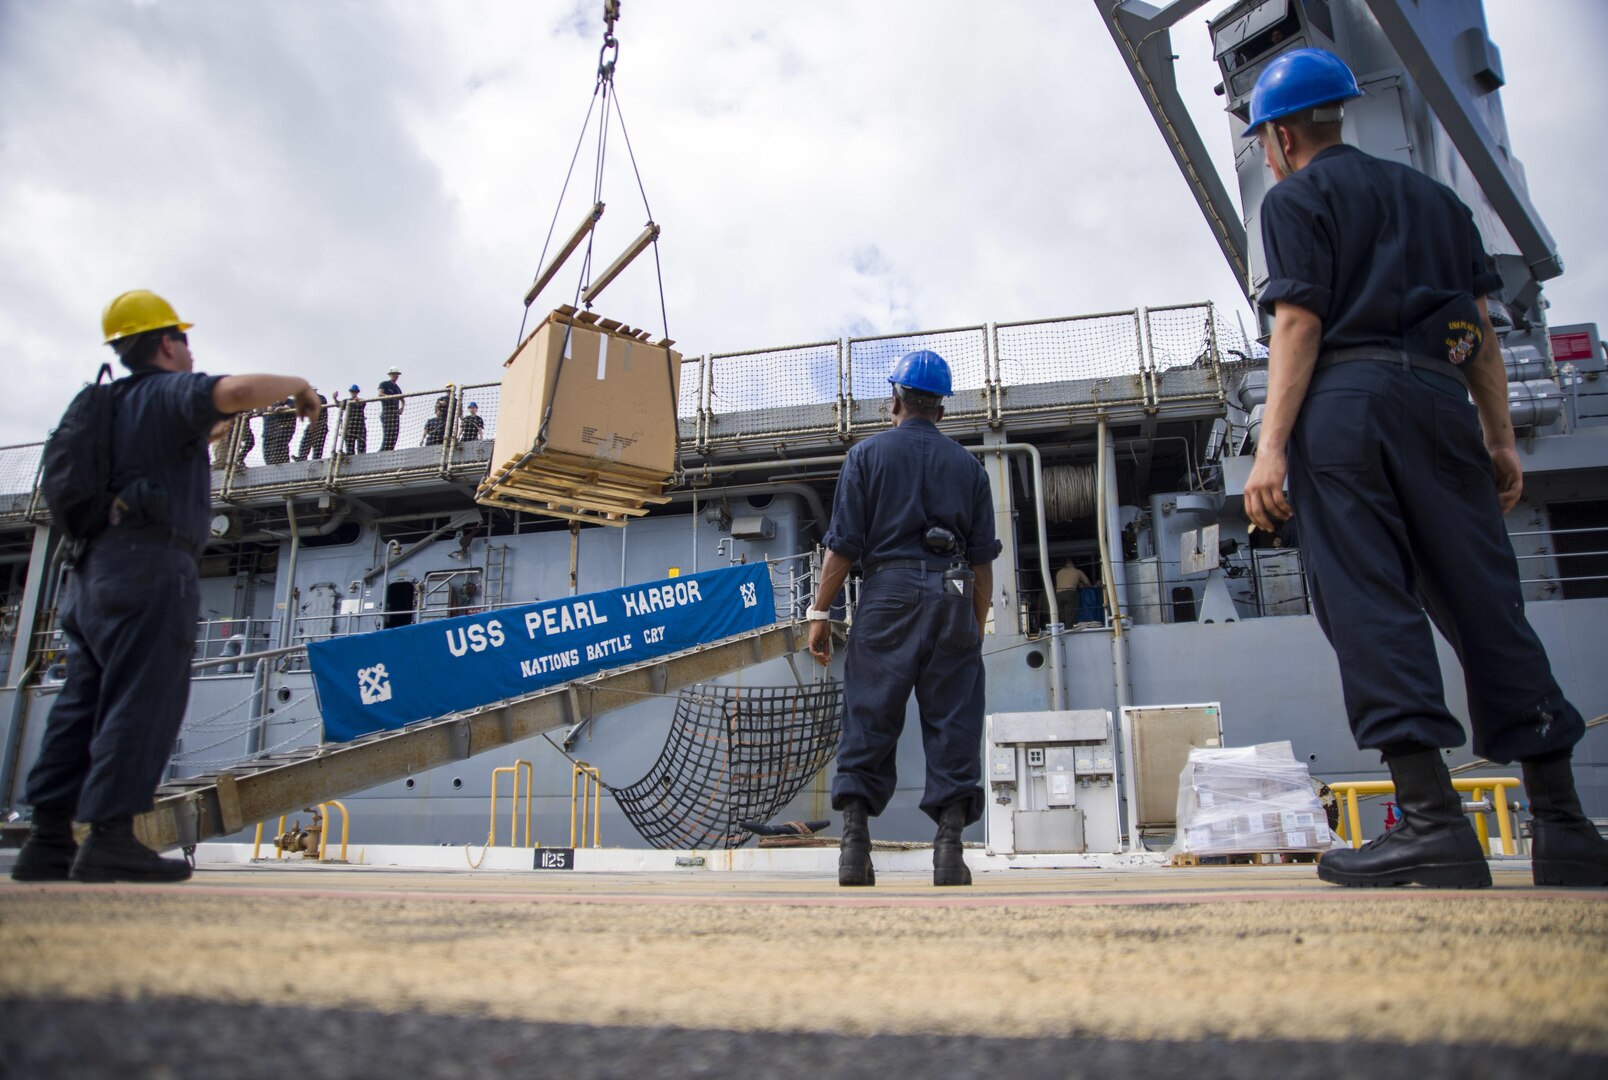 170607-N-NU281-0129 PEARL HARBOR (July 14, 2017) Sailors assigned to amphibious dock landing ship USS Pearl Harbor (LSD 52) load supplies while moored at Joint Base Pearl Harbor-Hickam during a port visit to its namesake, July 14, before returning to its homeport in San Diego. The ship arrived on the eve of the commissioning ceremony of future USS John Finn (DDG 113) to help honor its official arrival into the U.S. Navy fleet. (U.S. Navy photo by MC3 Justin R. Pacheco)